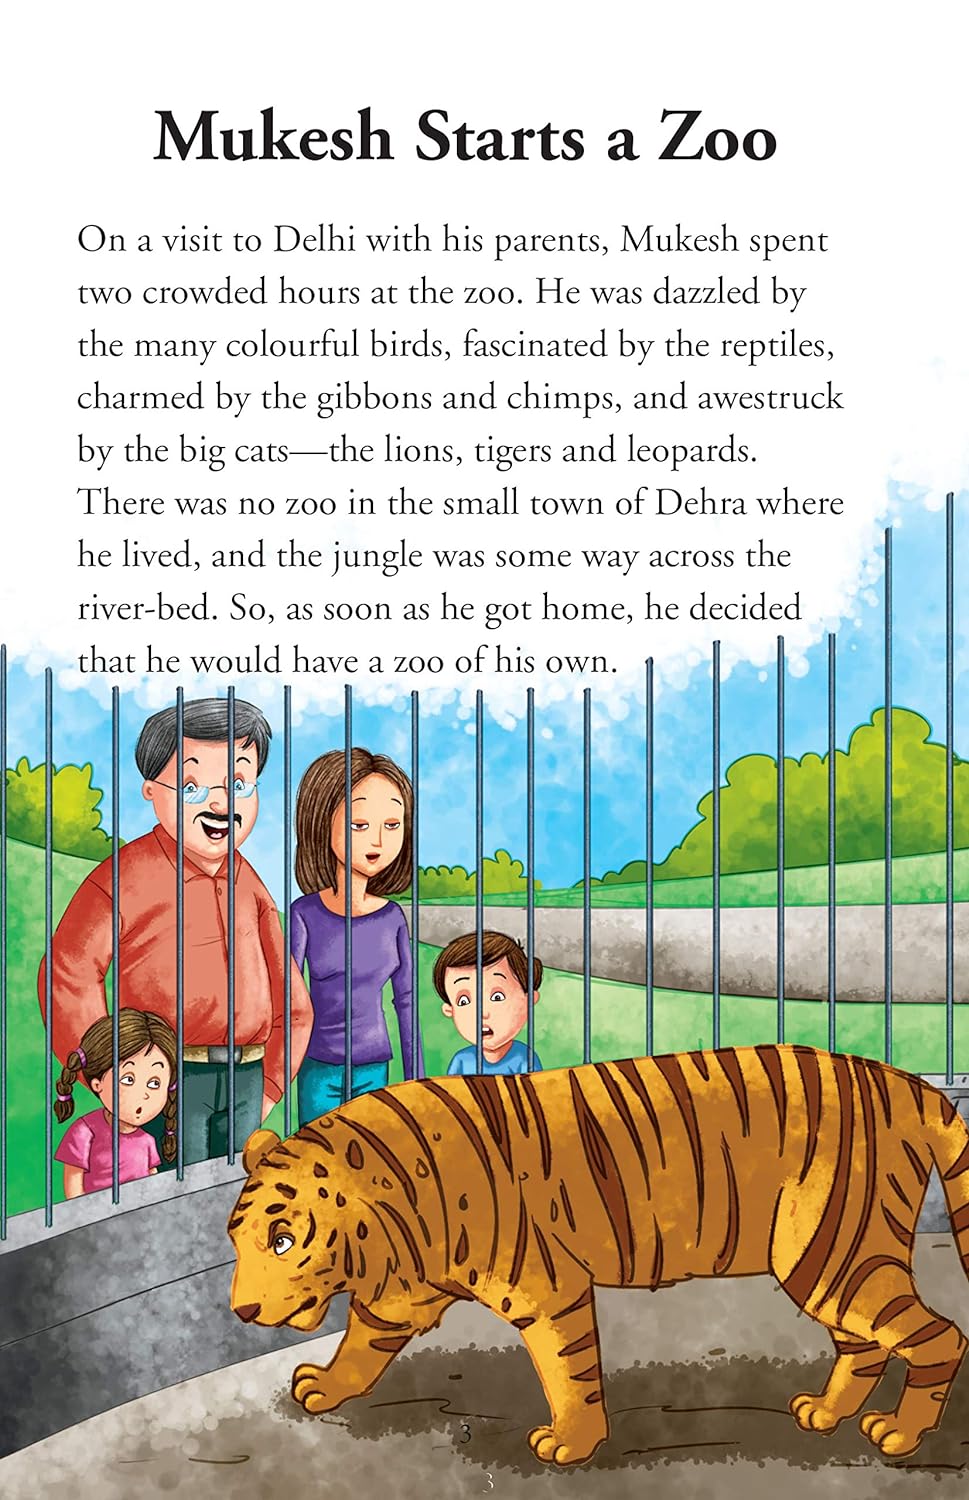 Pegasus Ruskin Bond - Tales from the Childhood